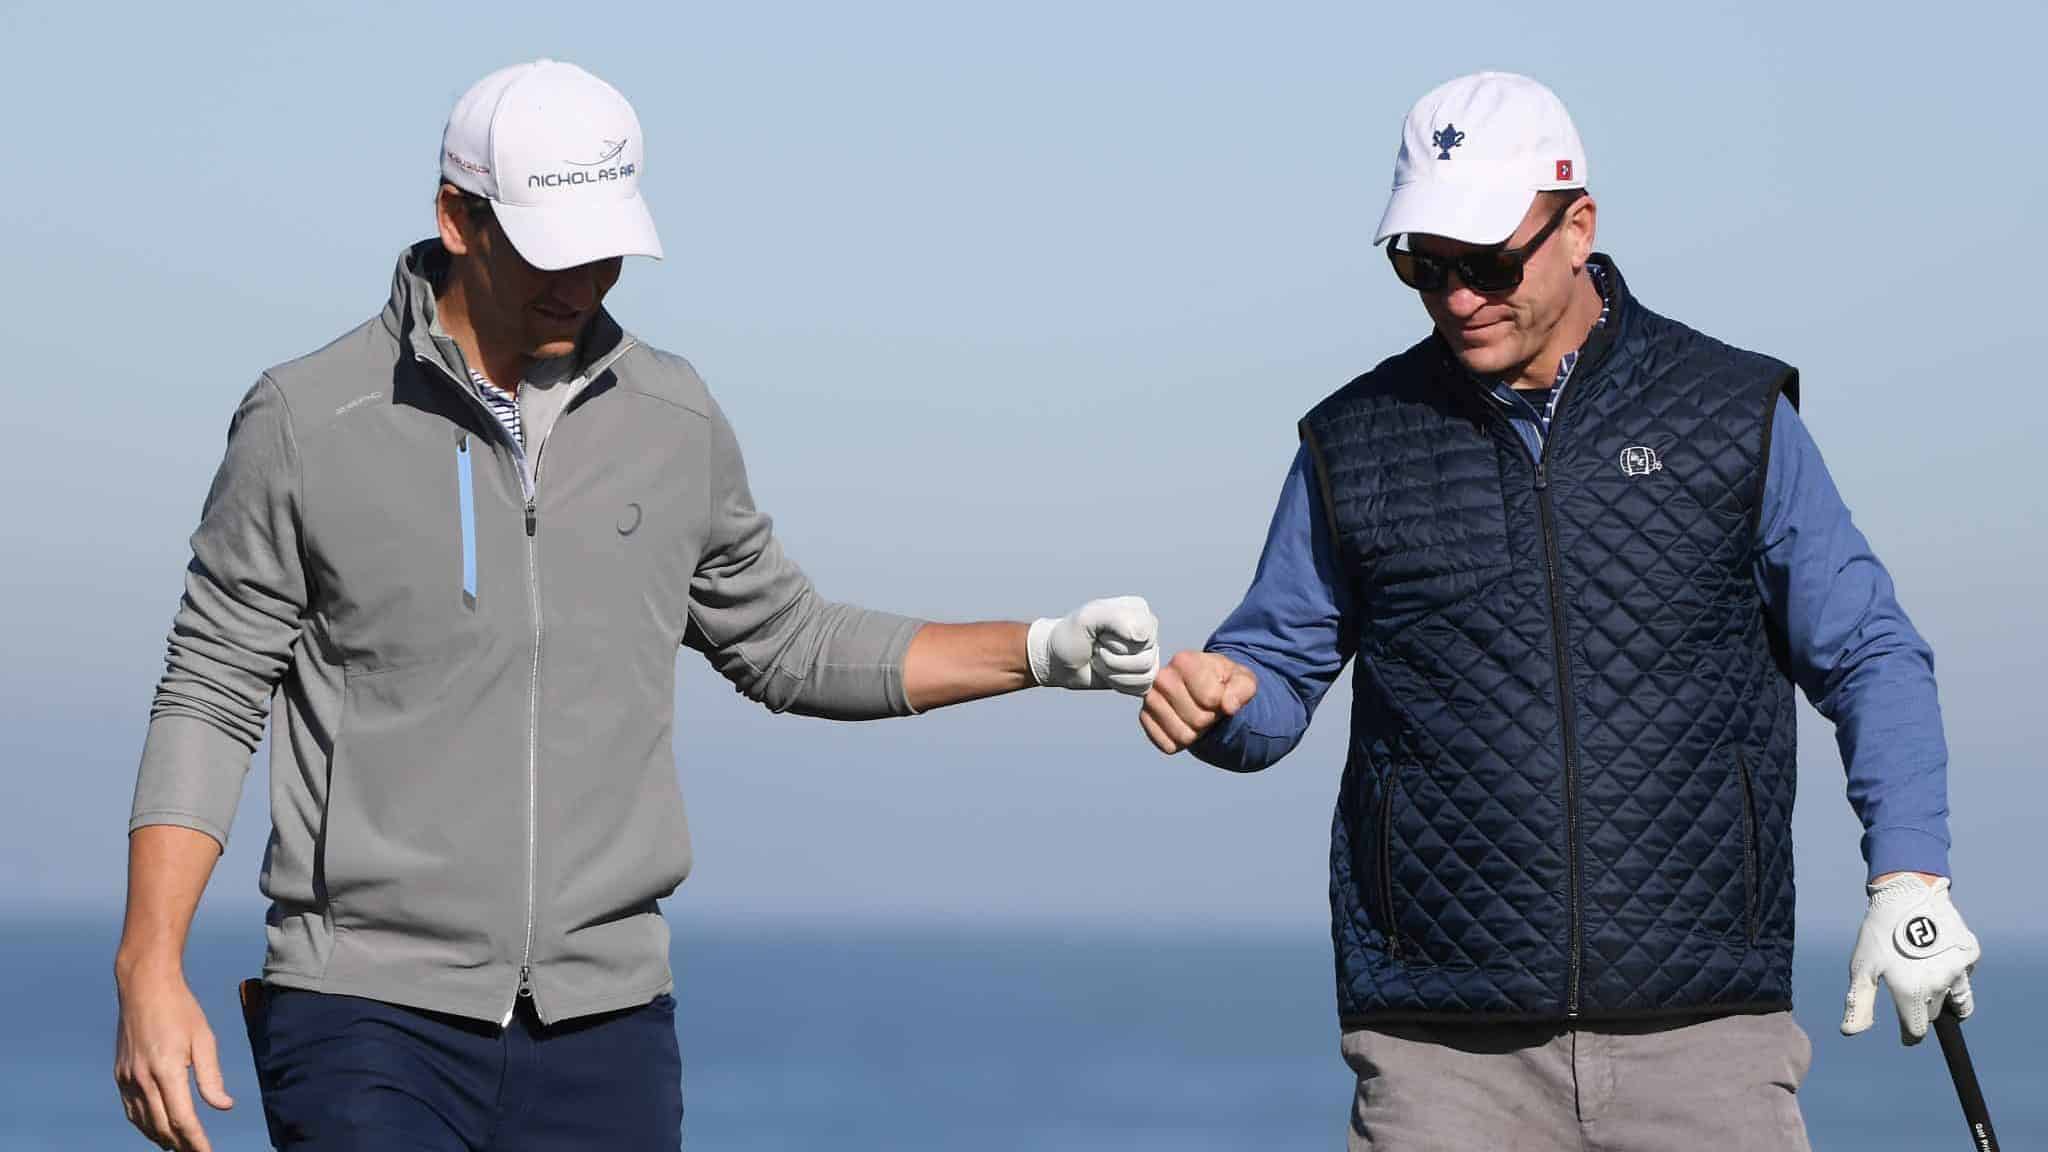 PEBBLE BEACH, CALIFORNIA - FEBRUARY 07: Former NFL players Eli and Peyton Manning celebrate during the second round of the AT&T Pebble Beach Pro-Am at Monterey Peninsula Country Club on February 07, 2020 in Pebble Beach, California.